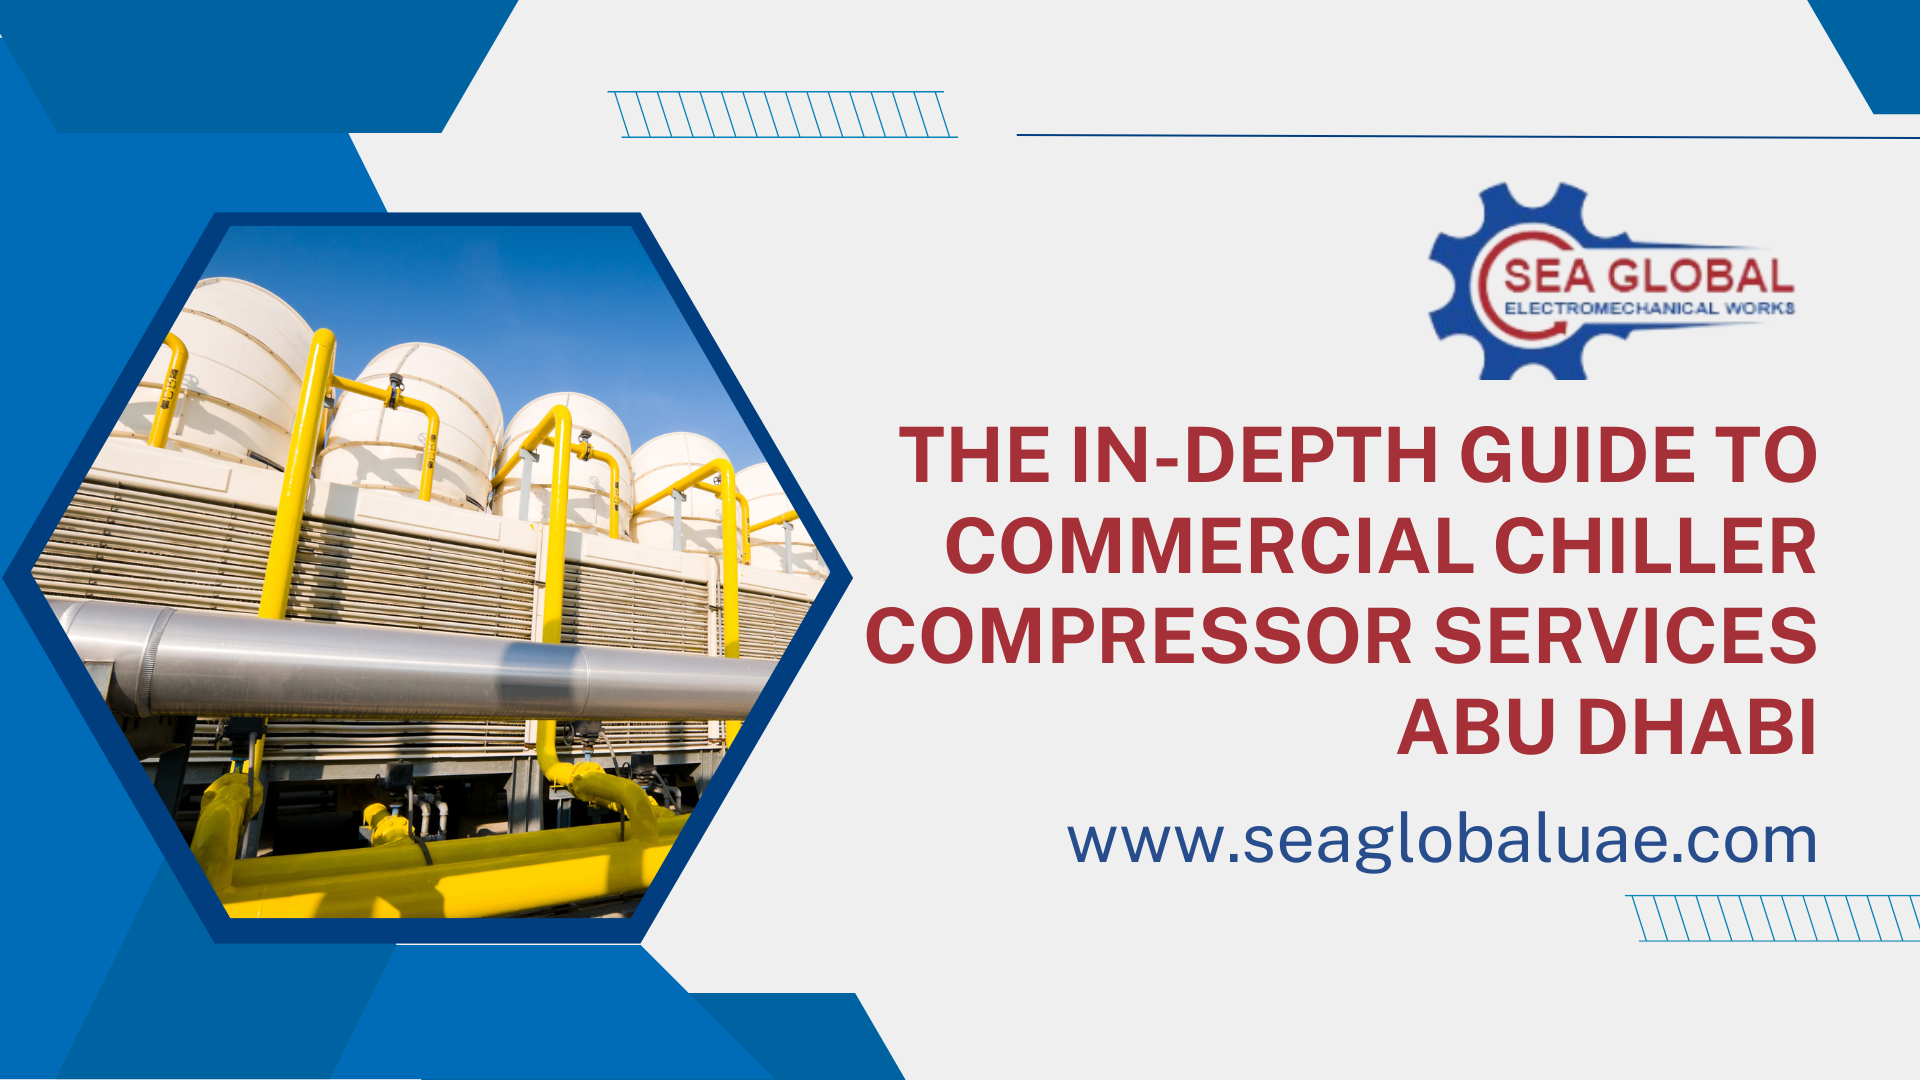 The In-Depth Guide to Commercial Chiller Compressor Services Abu Dhabi